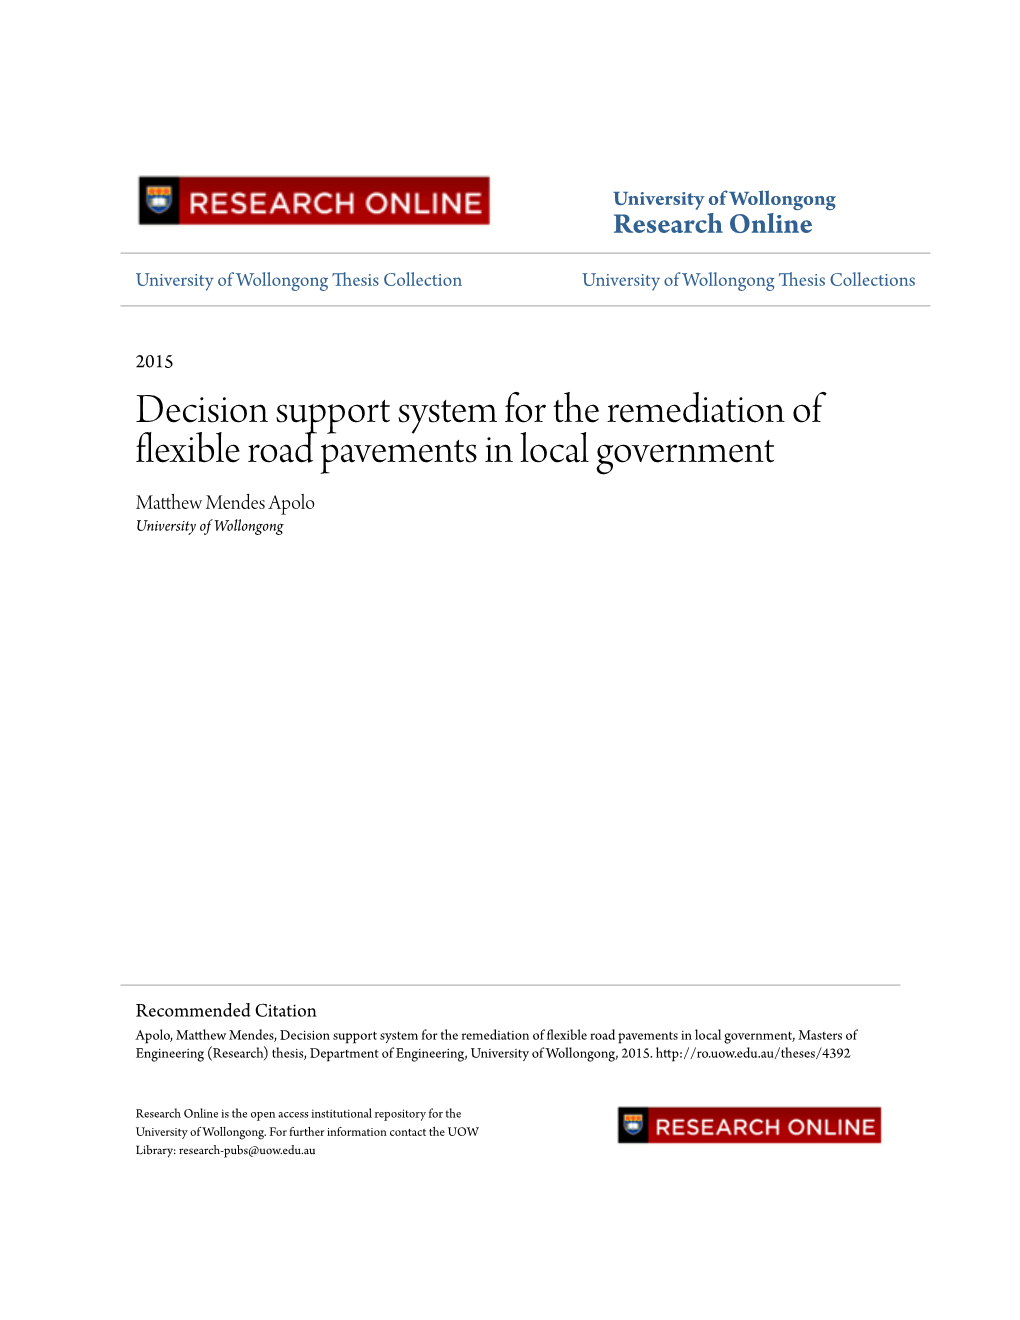 Decision Support System for the Remediation of Flexible Road Pavements in Local Government Matthew Em Ndes Apolo University of Wollongong